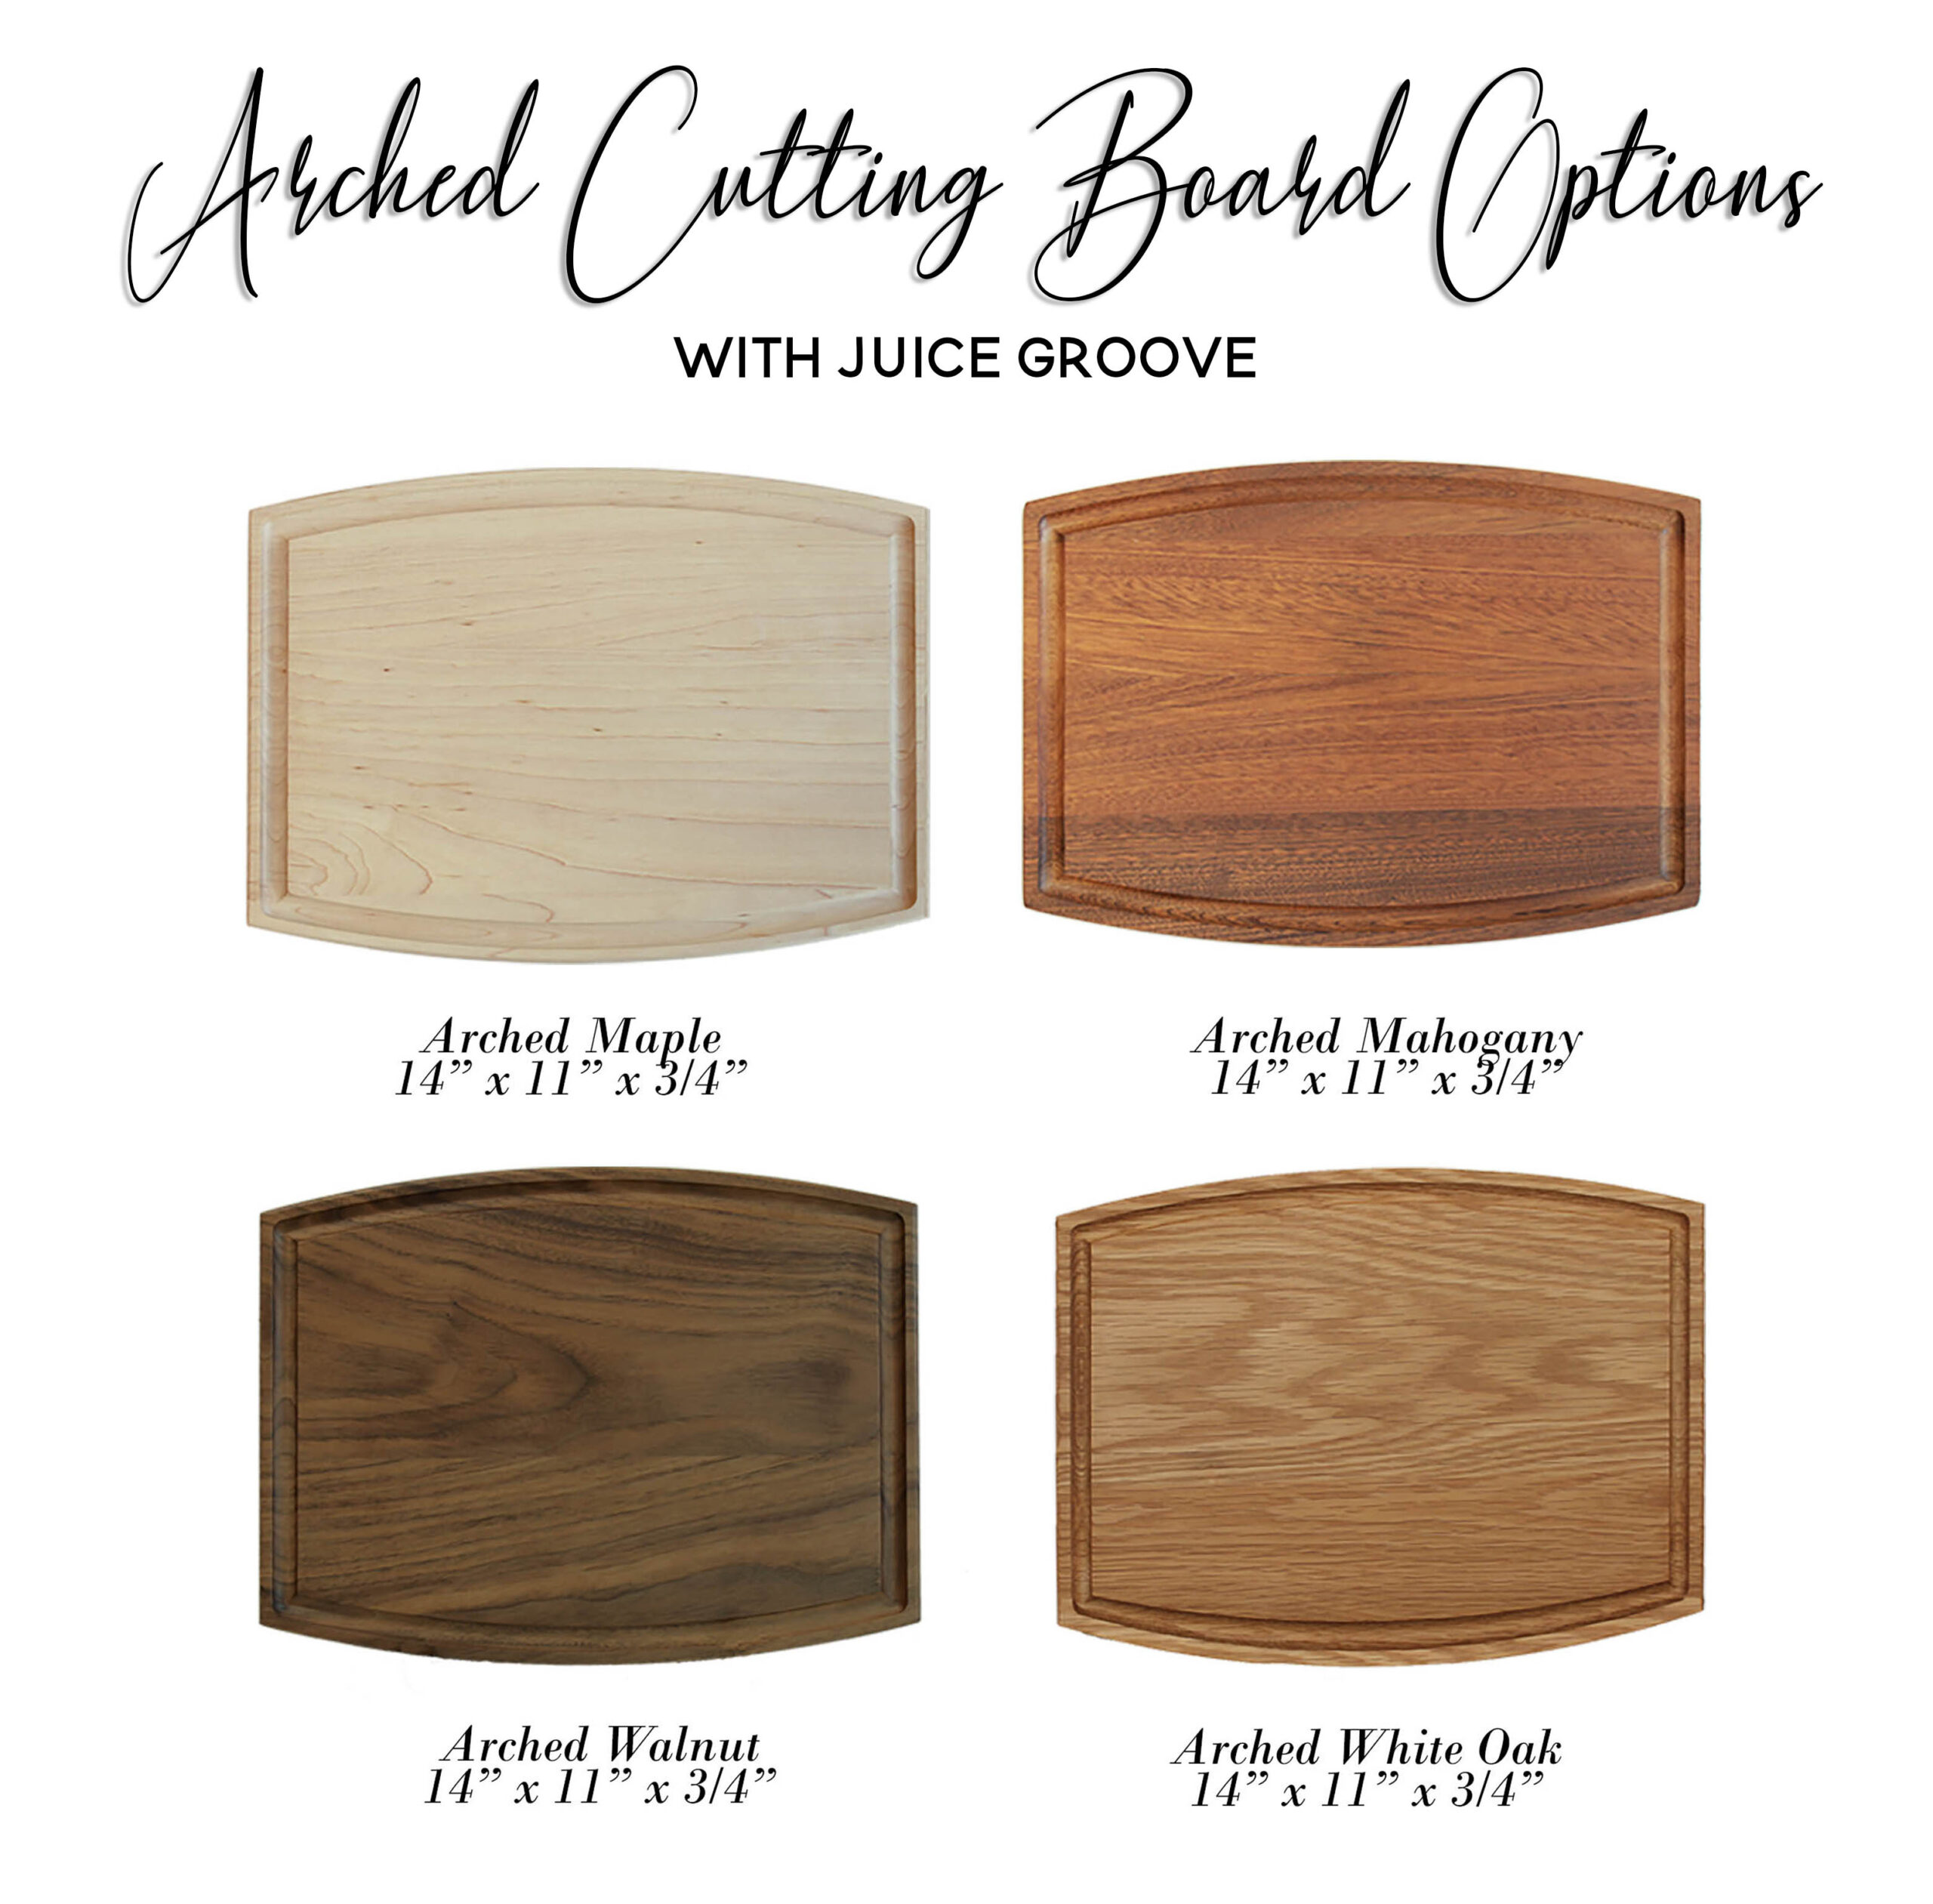 https://www.etchey.com/wp-content/uploads/2019/08/ARCHED-CUTTING-BOARD-OPTIONS-scaled.jpg